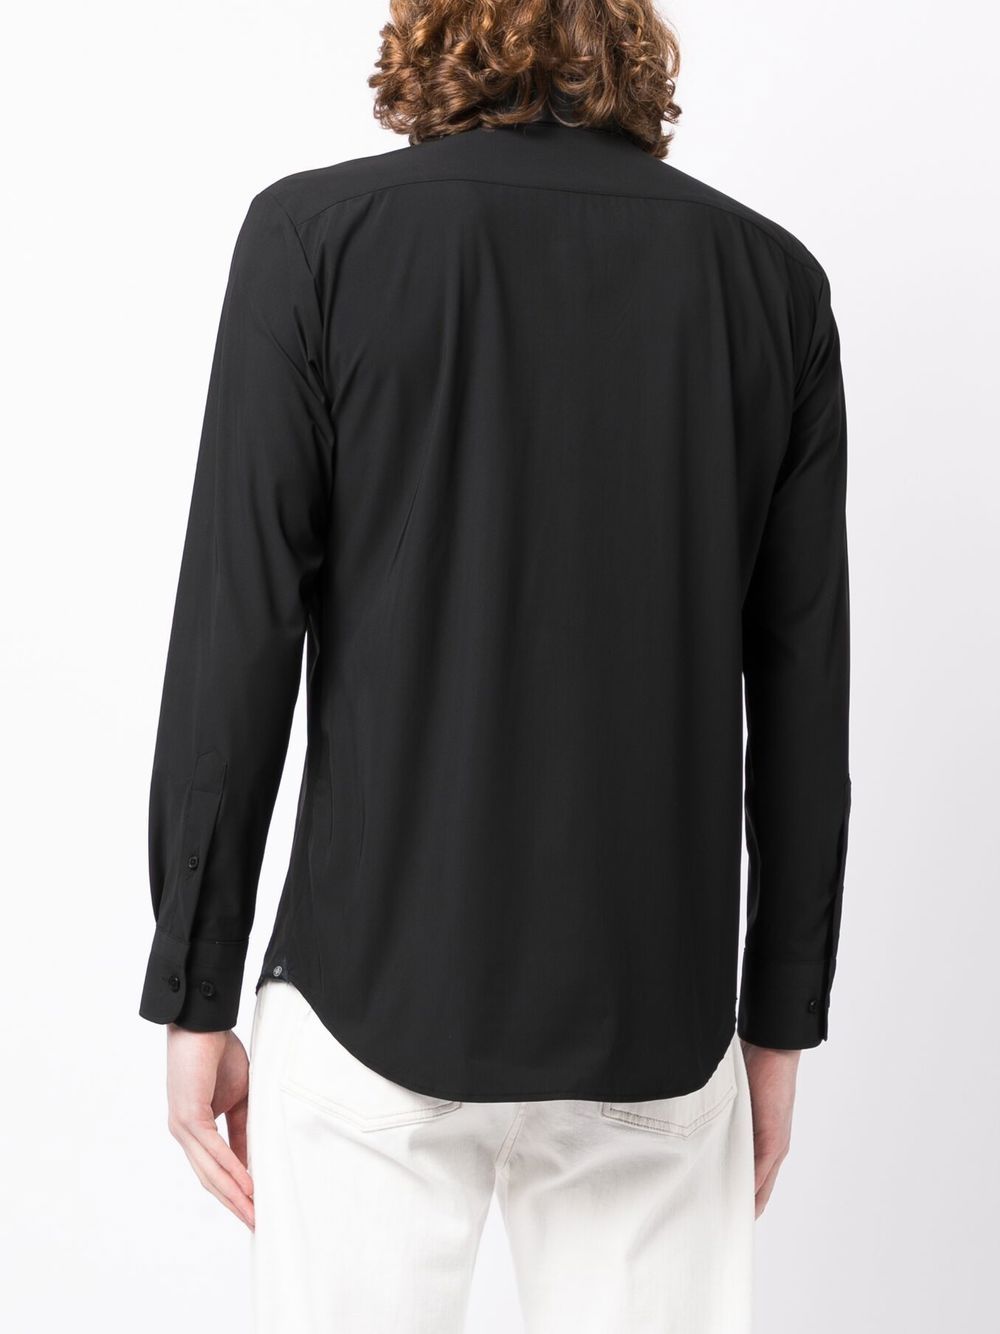 Shop Man On The Boon. Button-front Long-sleeved Shirt In Black